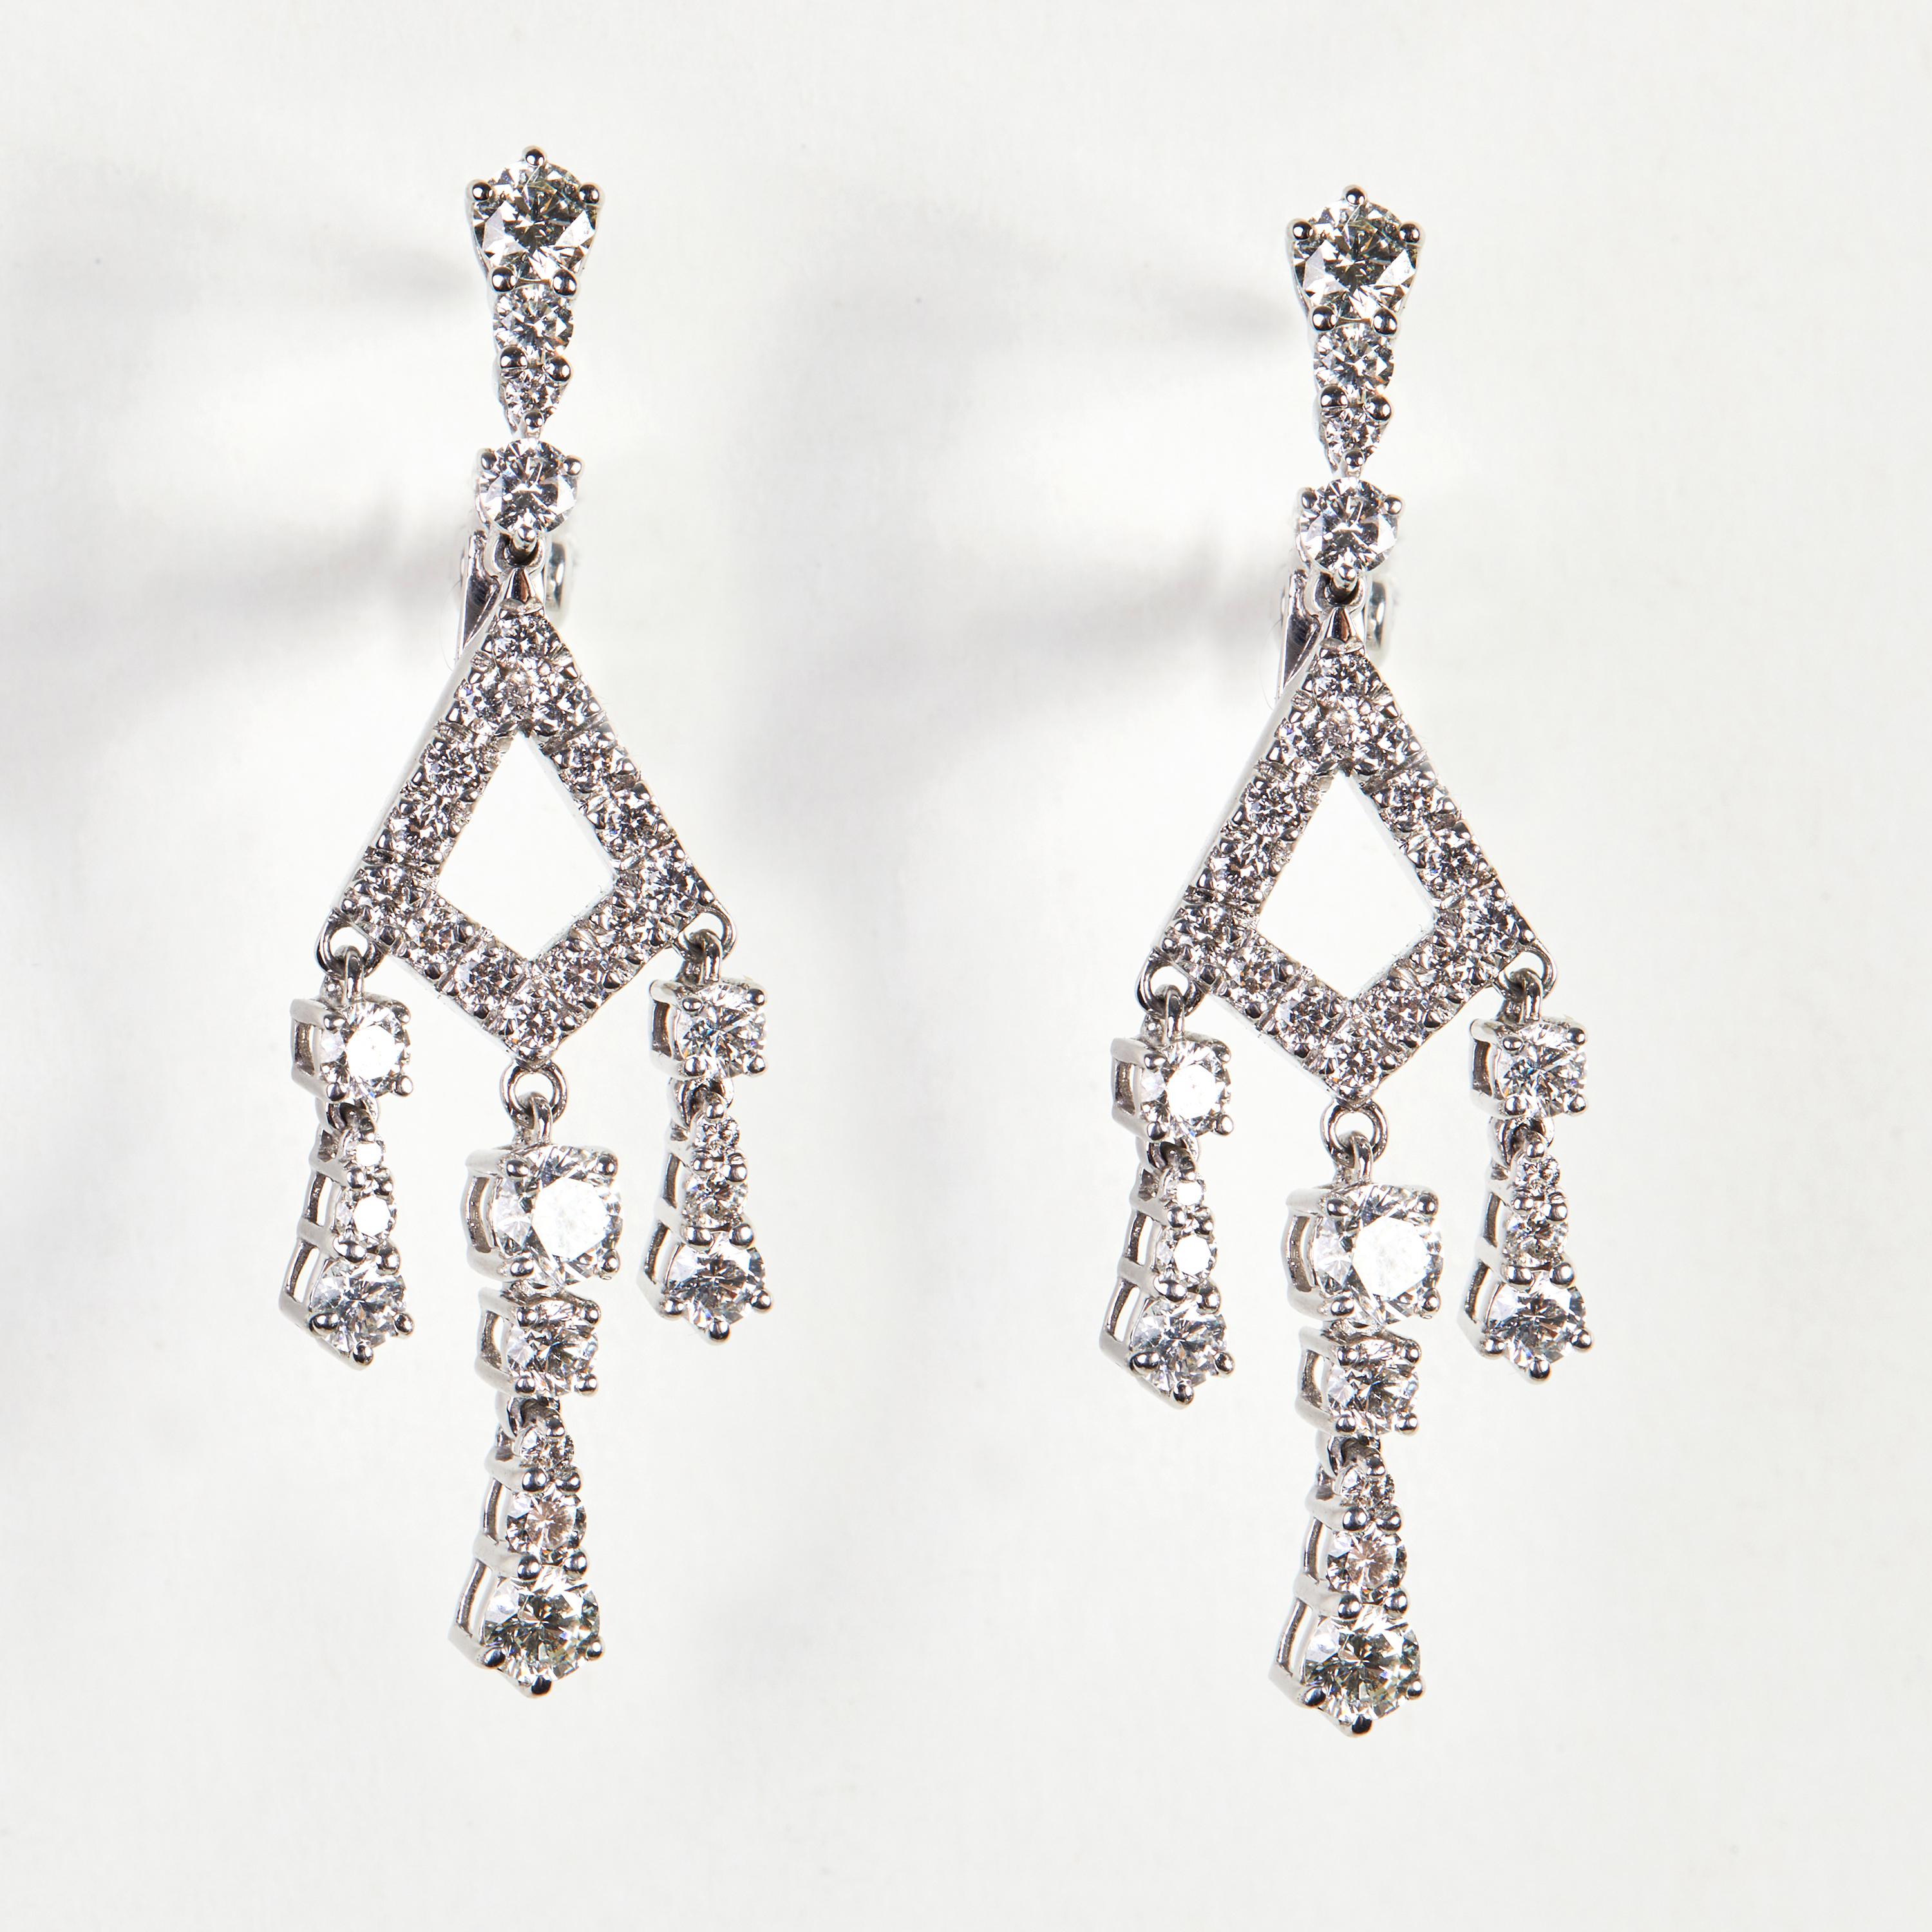 Earrings White Gold 18 K Gianni Lazzaro

Diamonds 62-2,05 ct HSI 

With a heritage of ancient fine Swiss jewelry traditions, NATKINA is a Geneva-based jewelry brand that creates modern jewelry masterpieces suitable for everyday life.
It is our honor